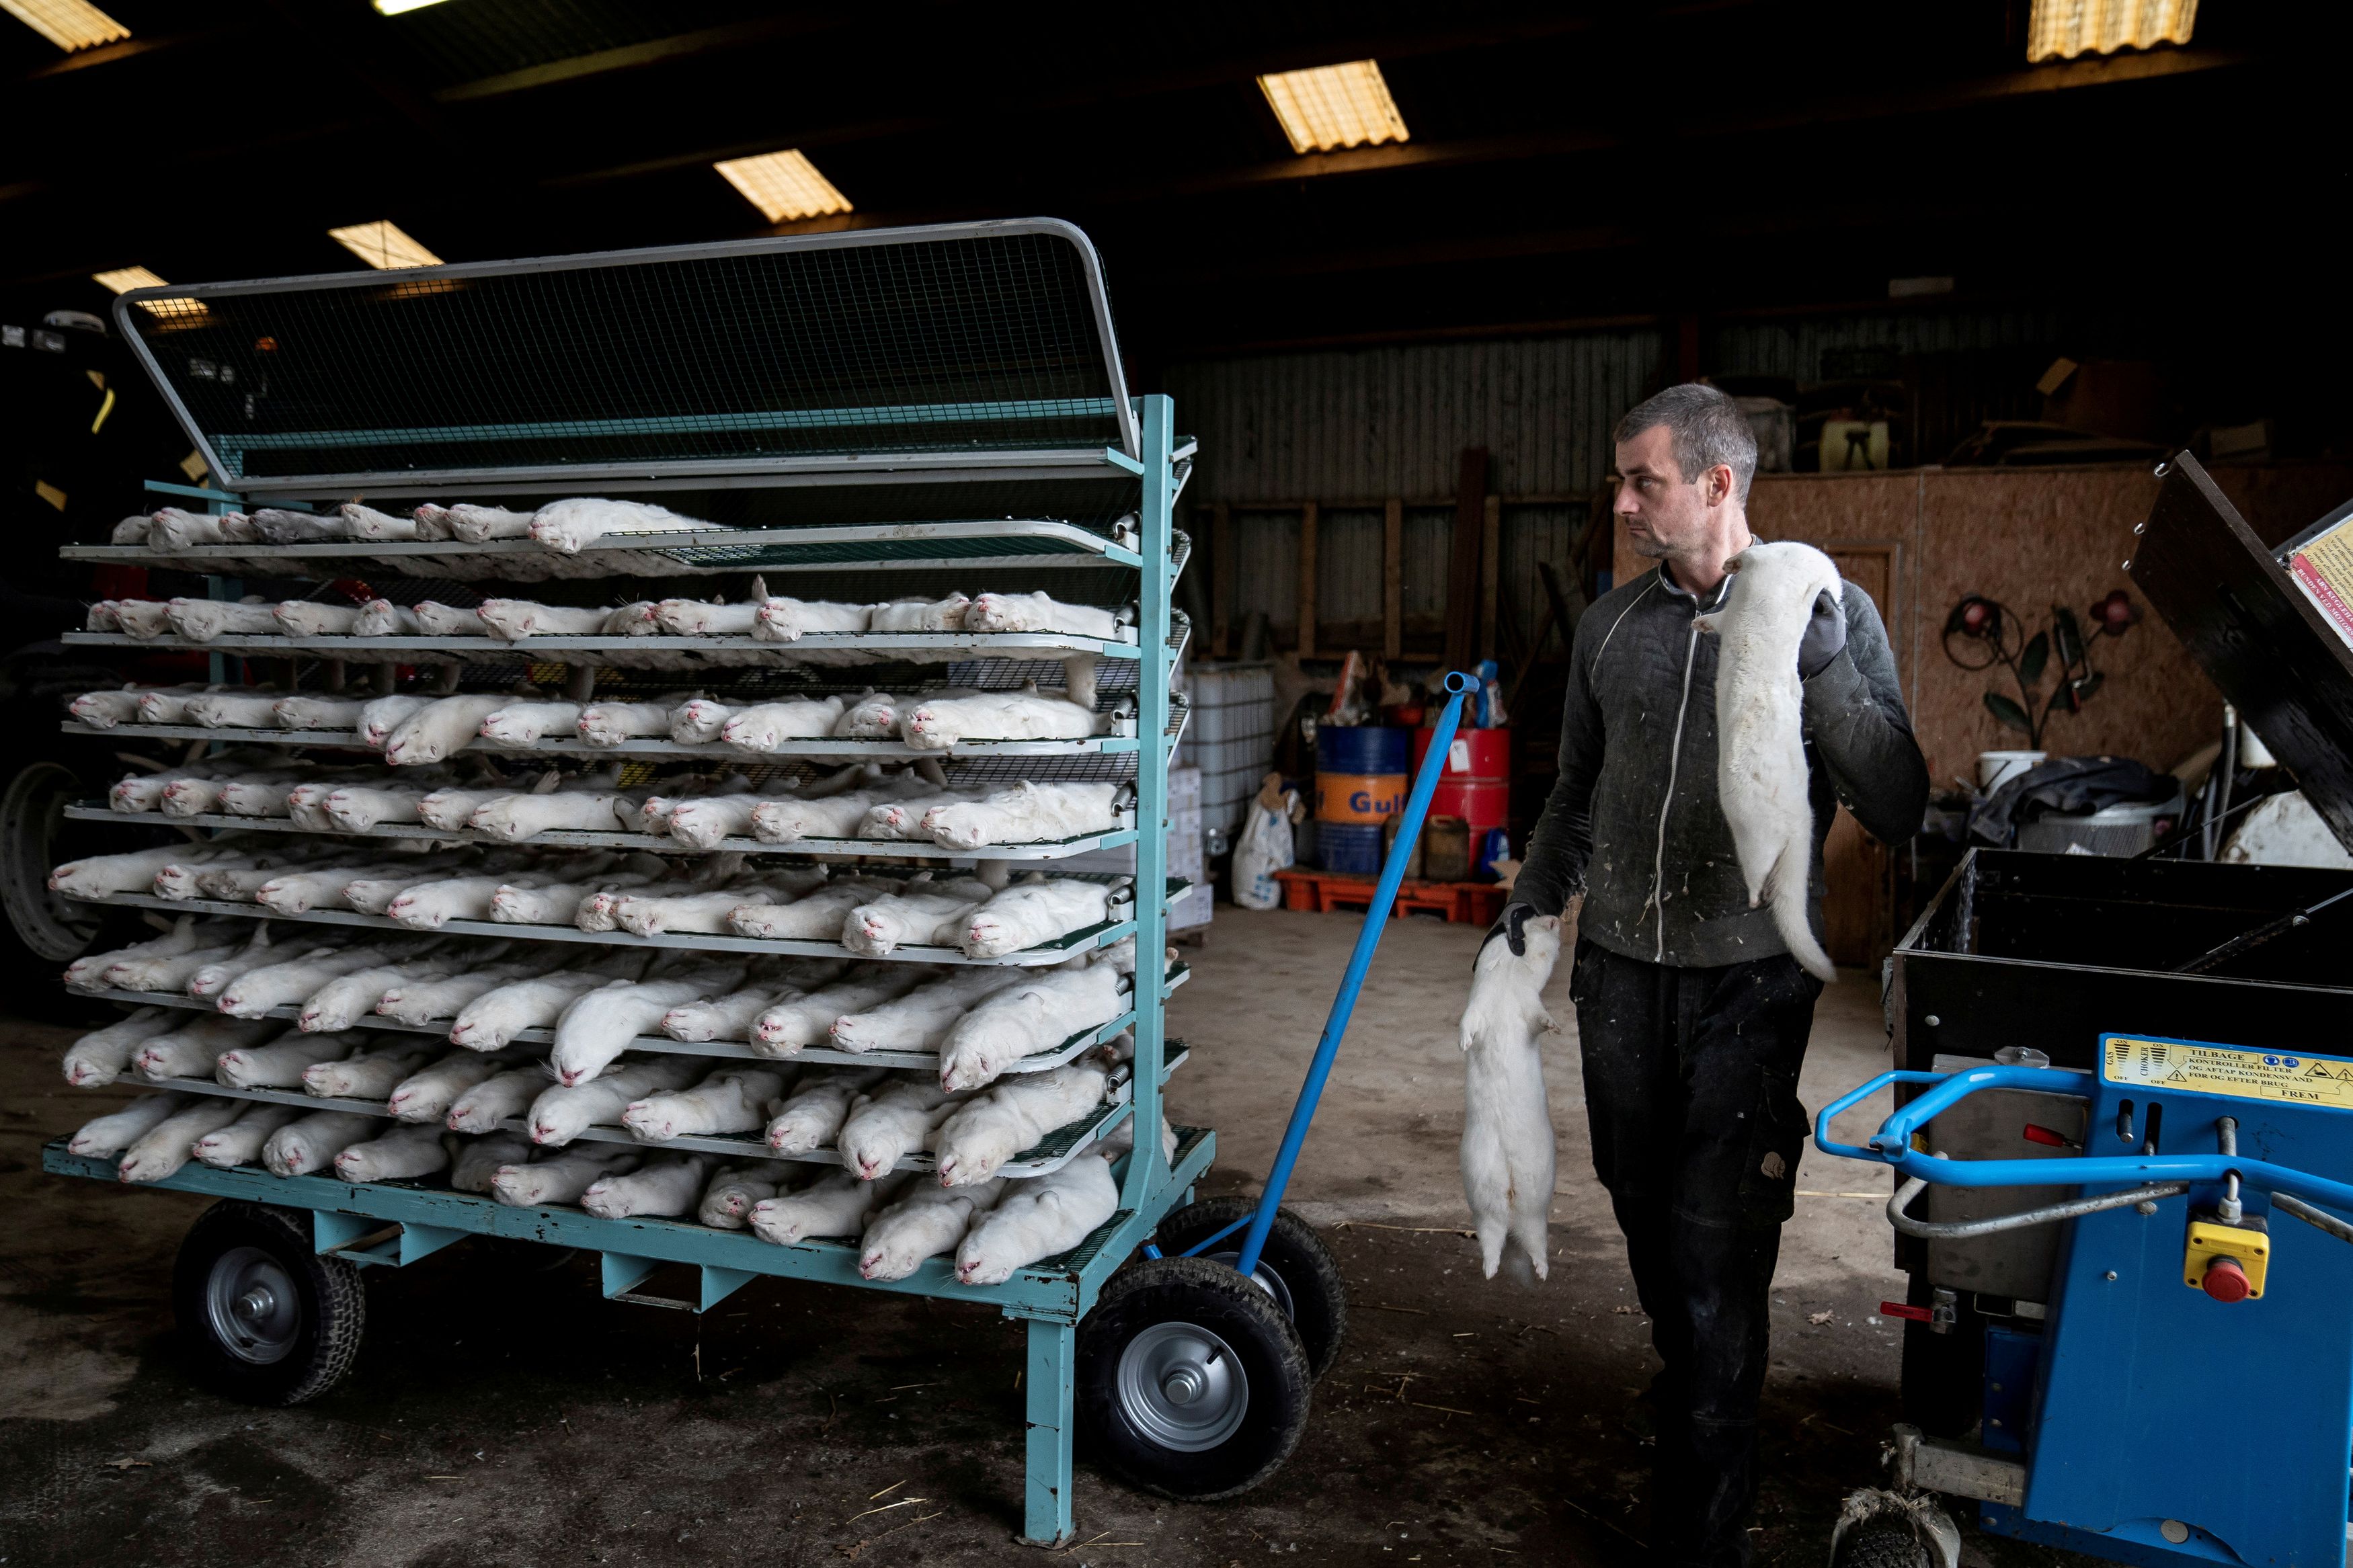 FILE PHOTO: A man handles culled mink at the farm of Henrik Nordgaard Hansen and Ann-Mona Kulsoe Larsen near Naestved, Denmark, November 6, 2020. Ritzau Scanpix/Mads Claus Rasmussen via REUTERS. ATTENTION EDITORS - THIS IMAGE WAS PROVIDED BY A THIRD PARTY. DENMARK OUT. NO COMMERCIAL OR EDITORIAL SALES IN DENMARK/File Photo